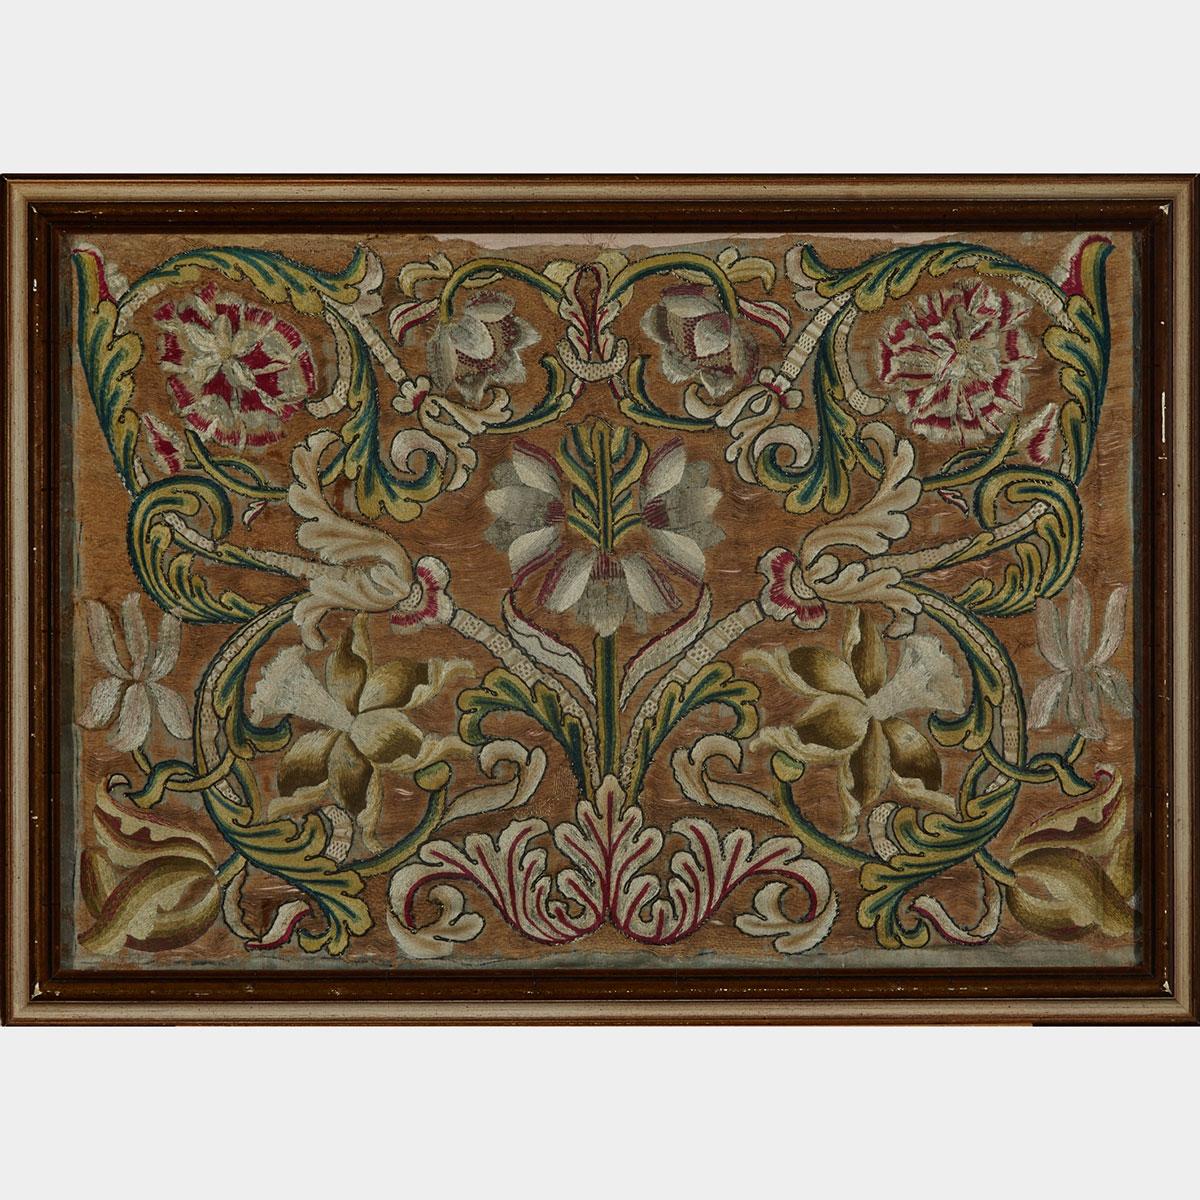 Floral Scrolling Needlework Panel, late 17th/early 18th century